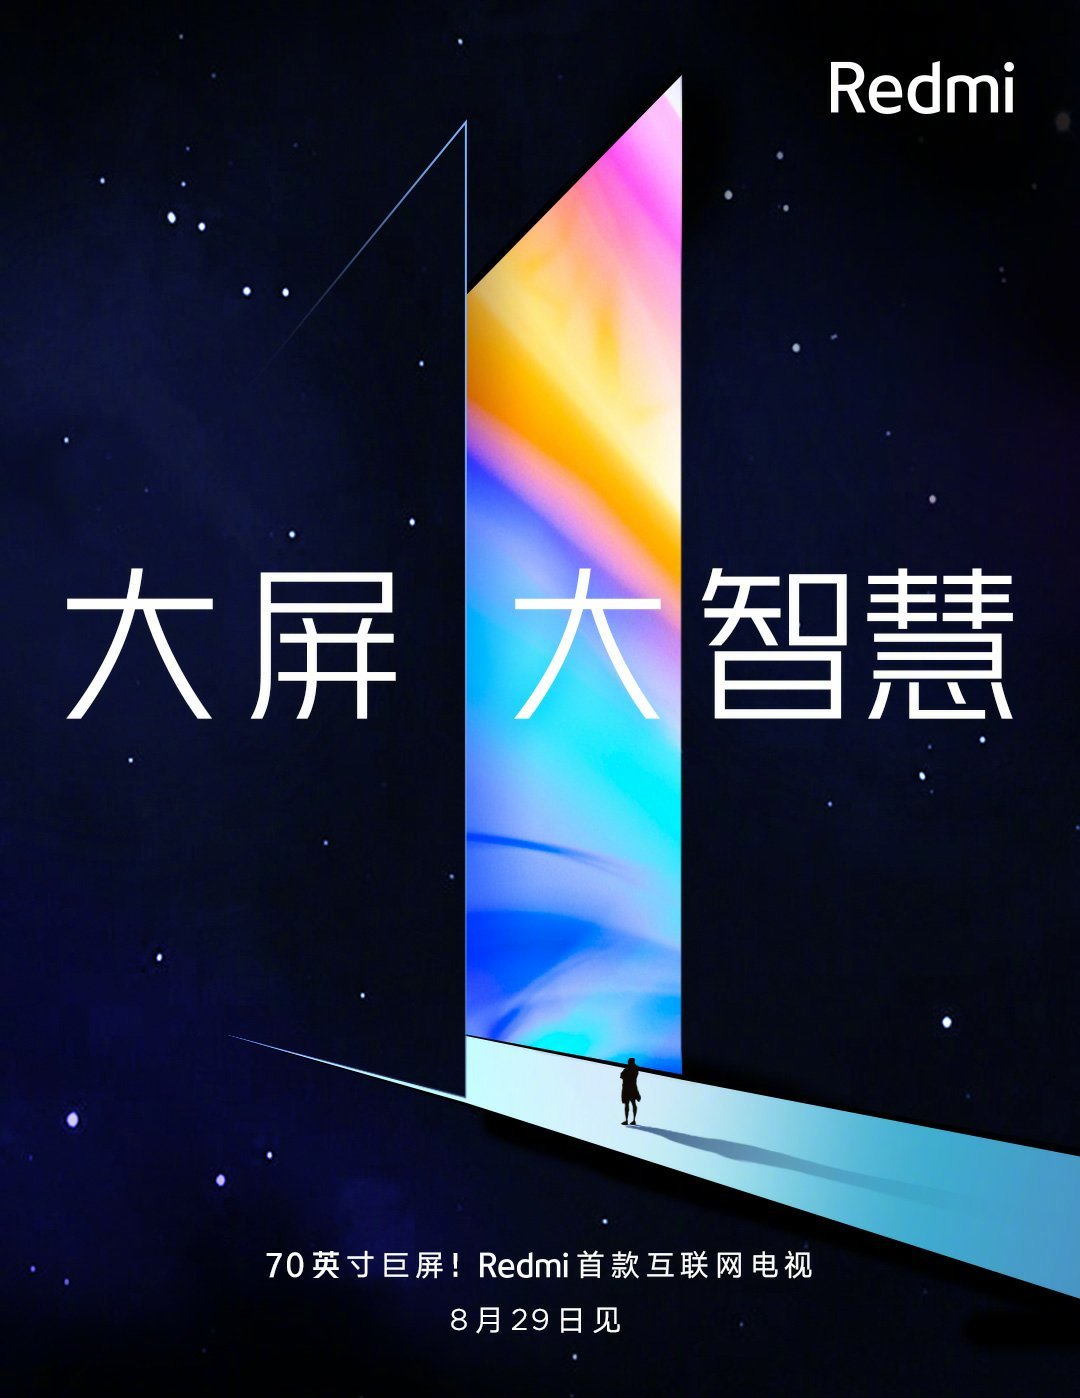 Redmi TV Will be Launched in China on August 29, Redmi 8 May Debut Alongside